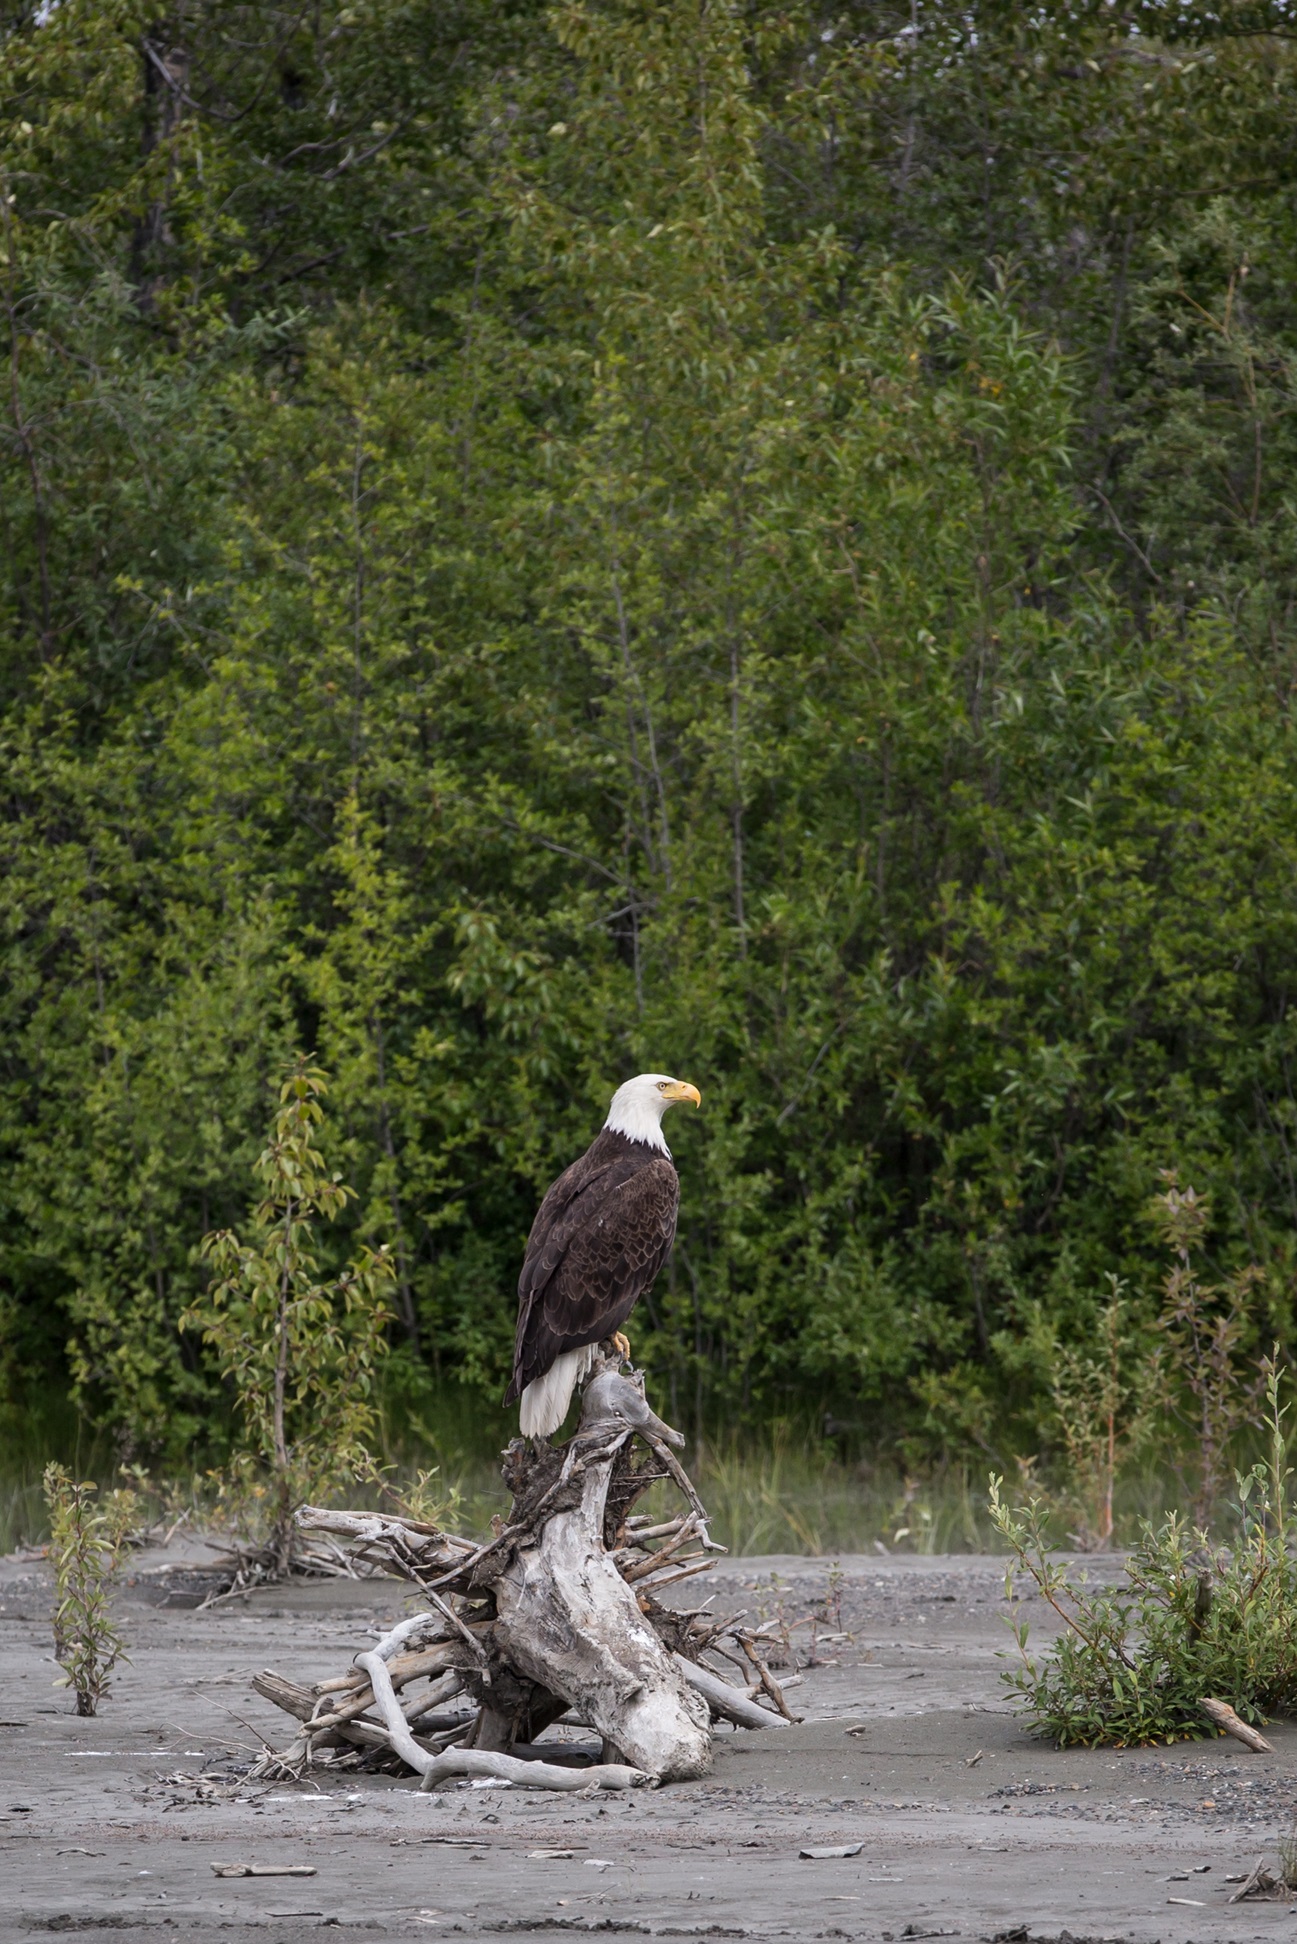 A massive-looking bald eagle in perched on top of a large piece of driftwood on a riverbank with a forest behind.